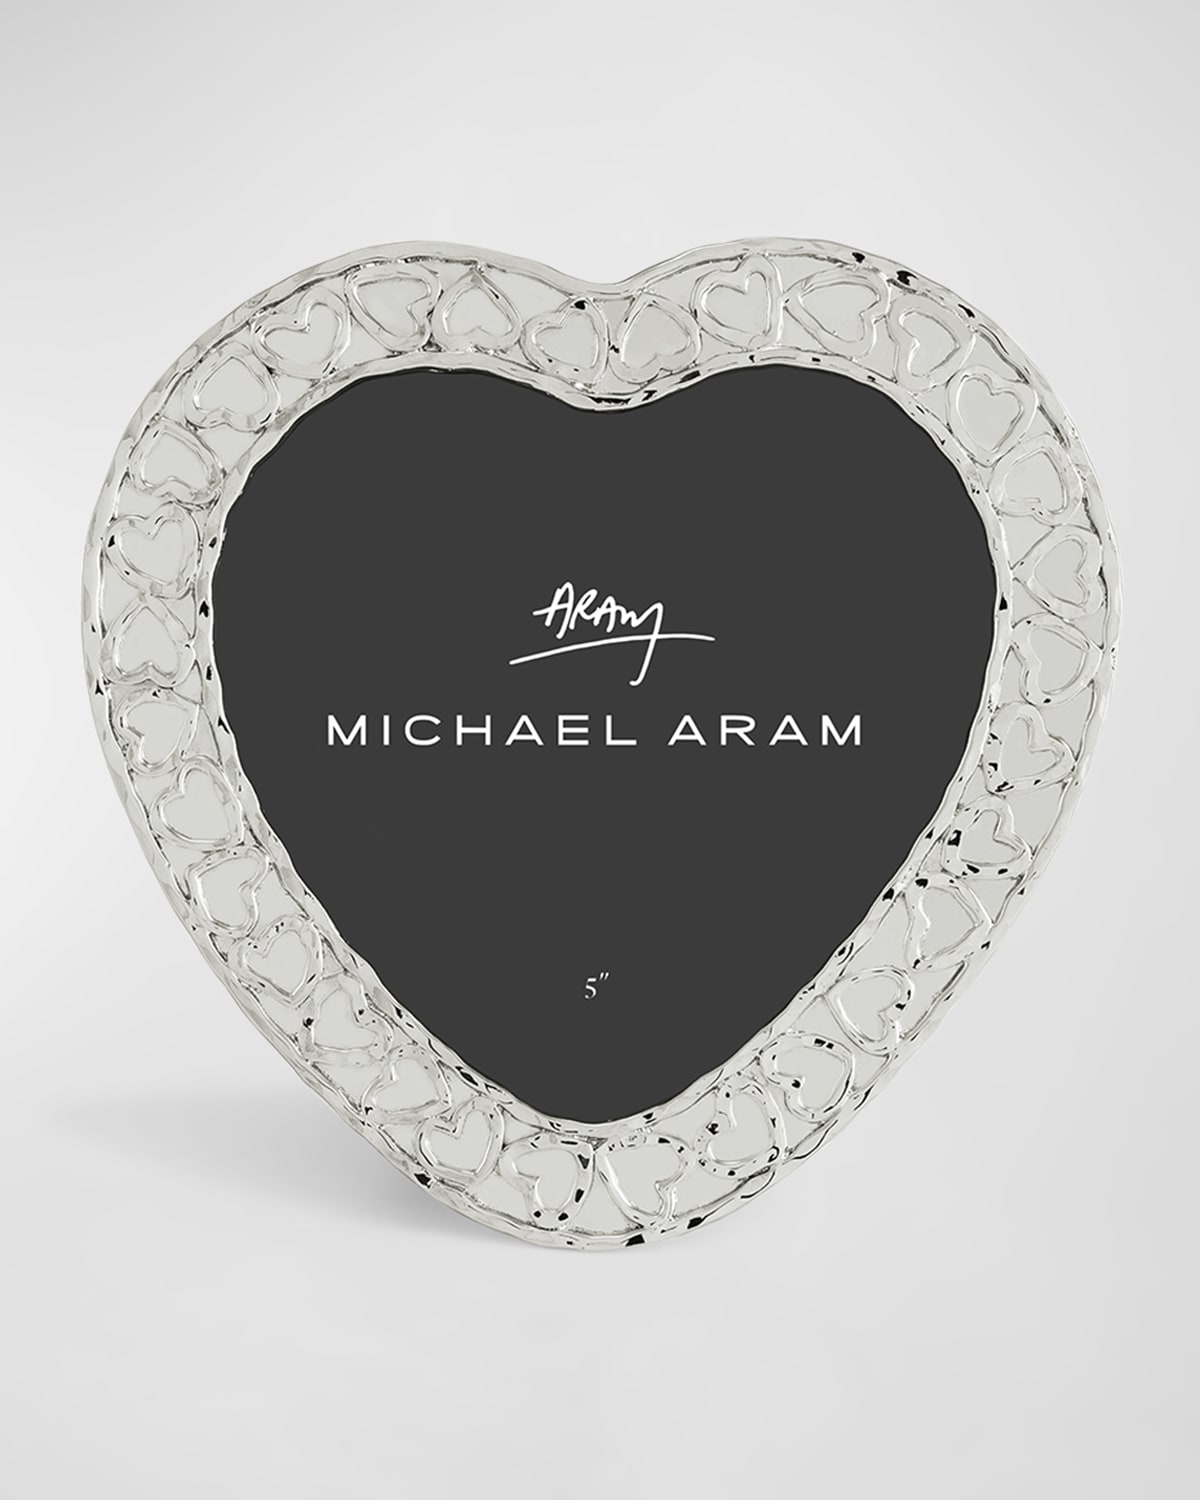 Michael Aram Heart Picture Frame In Silver